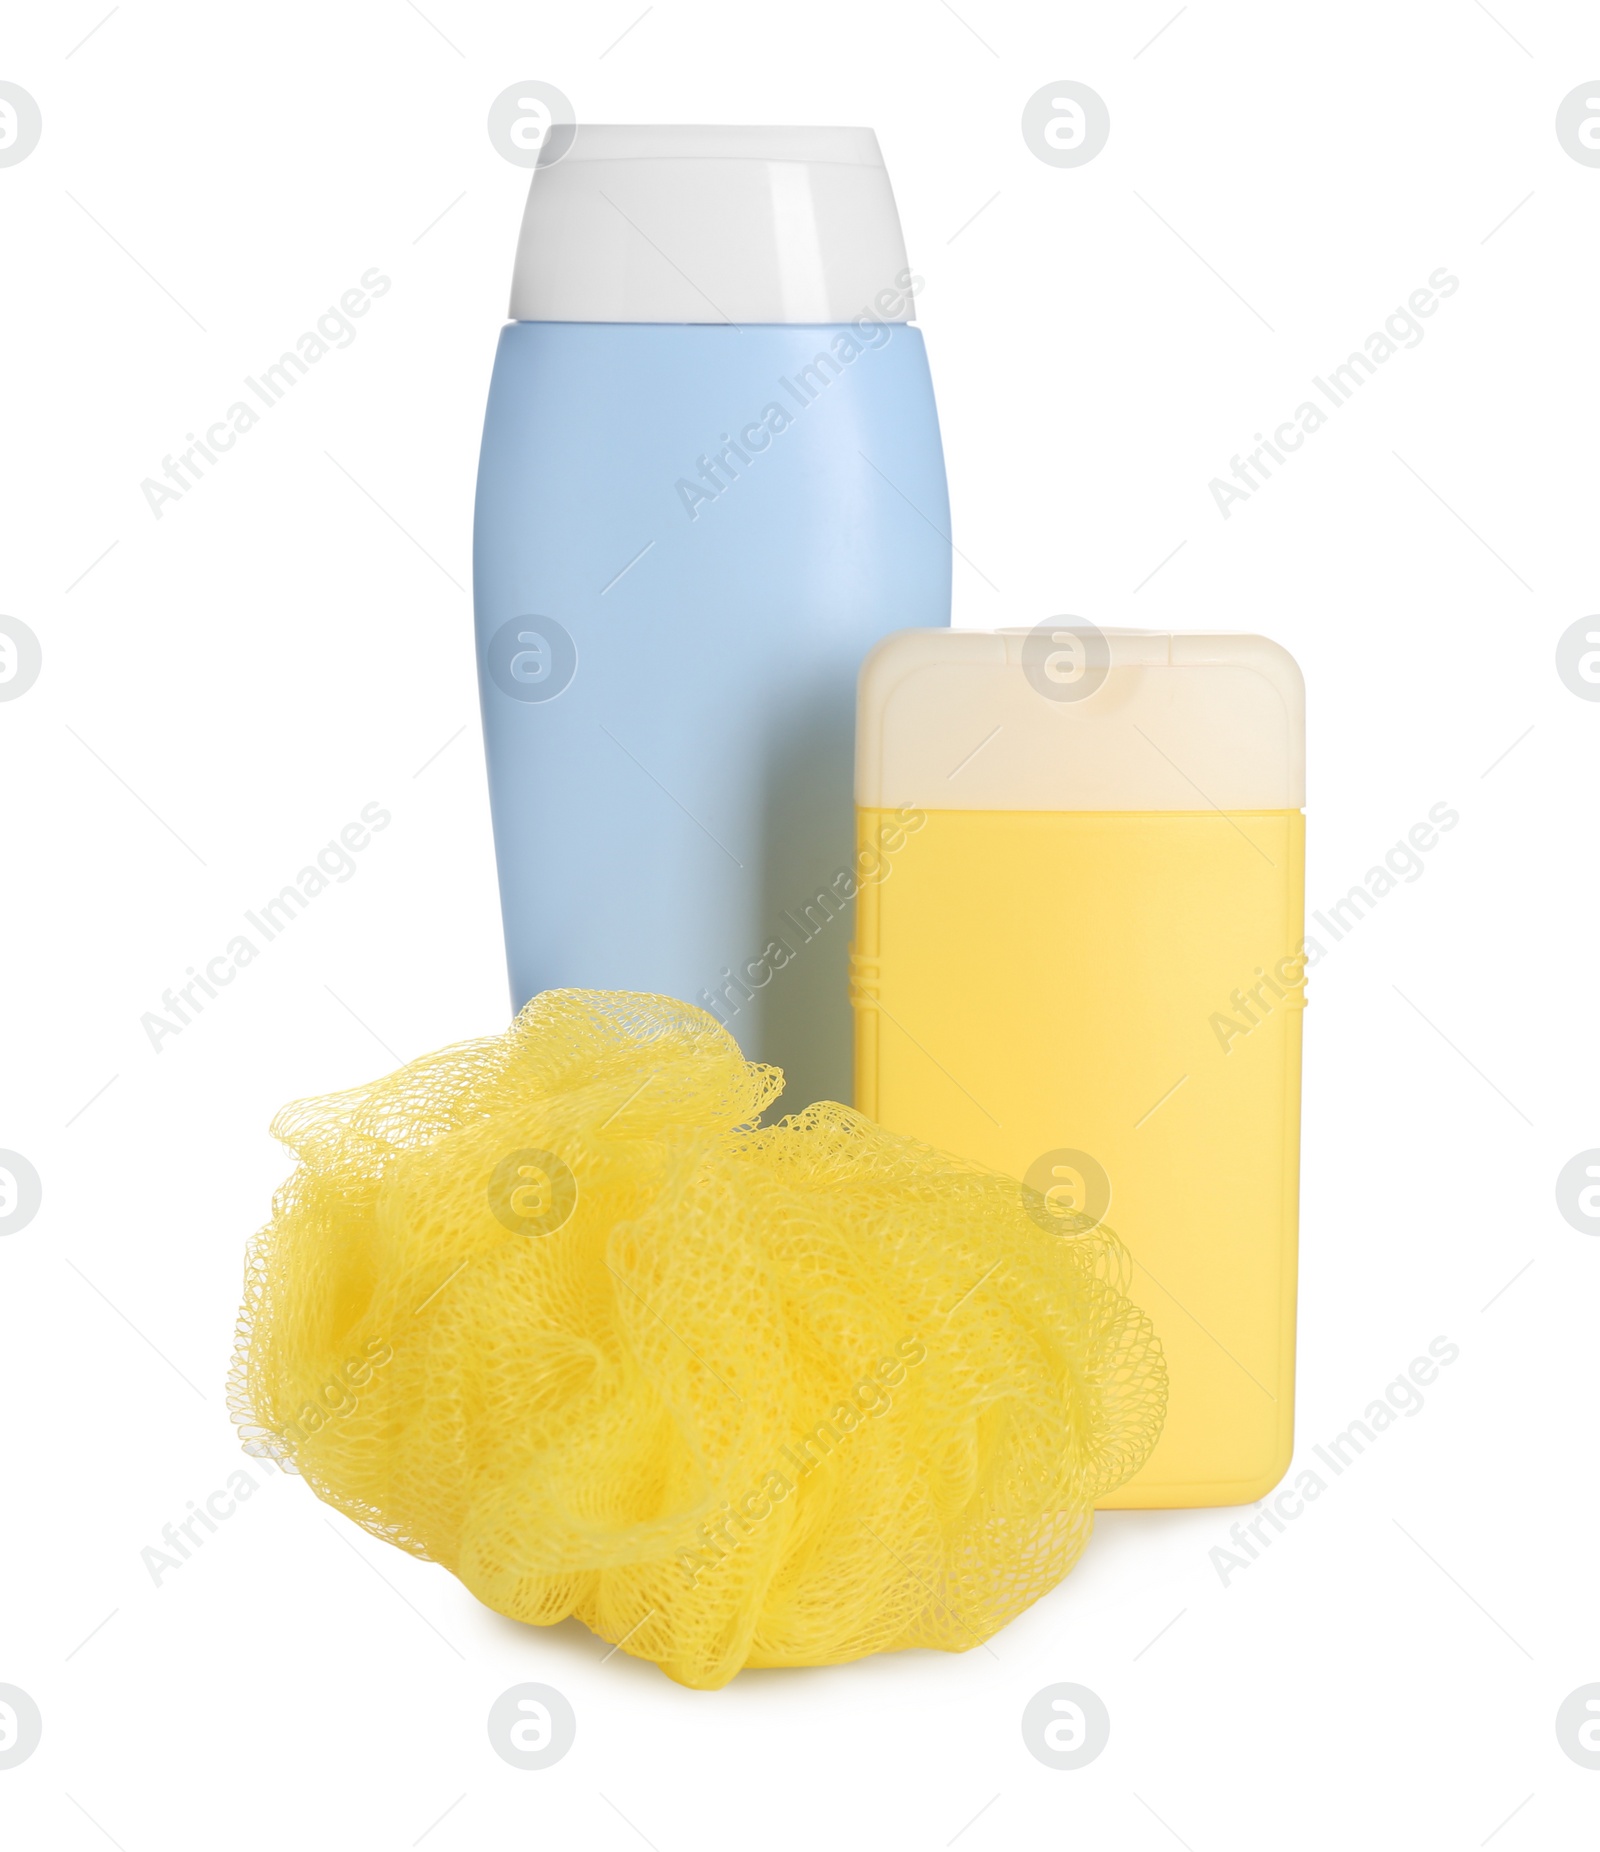 Photo of Different shower gel bottles and bast wisp on white background